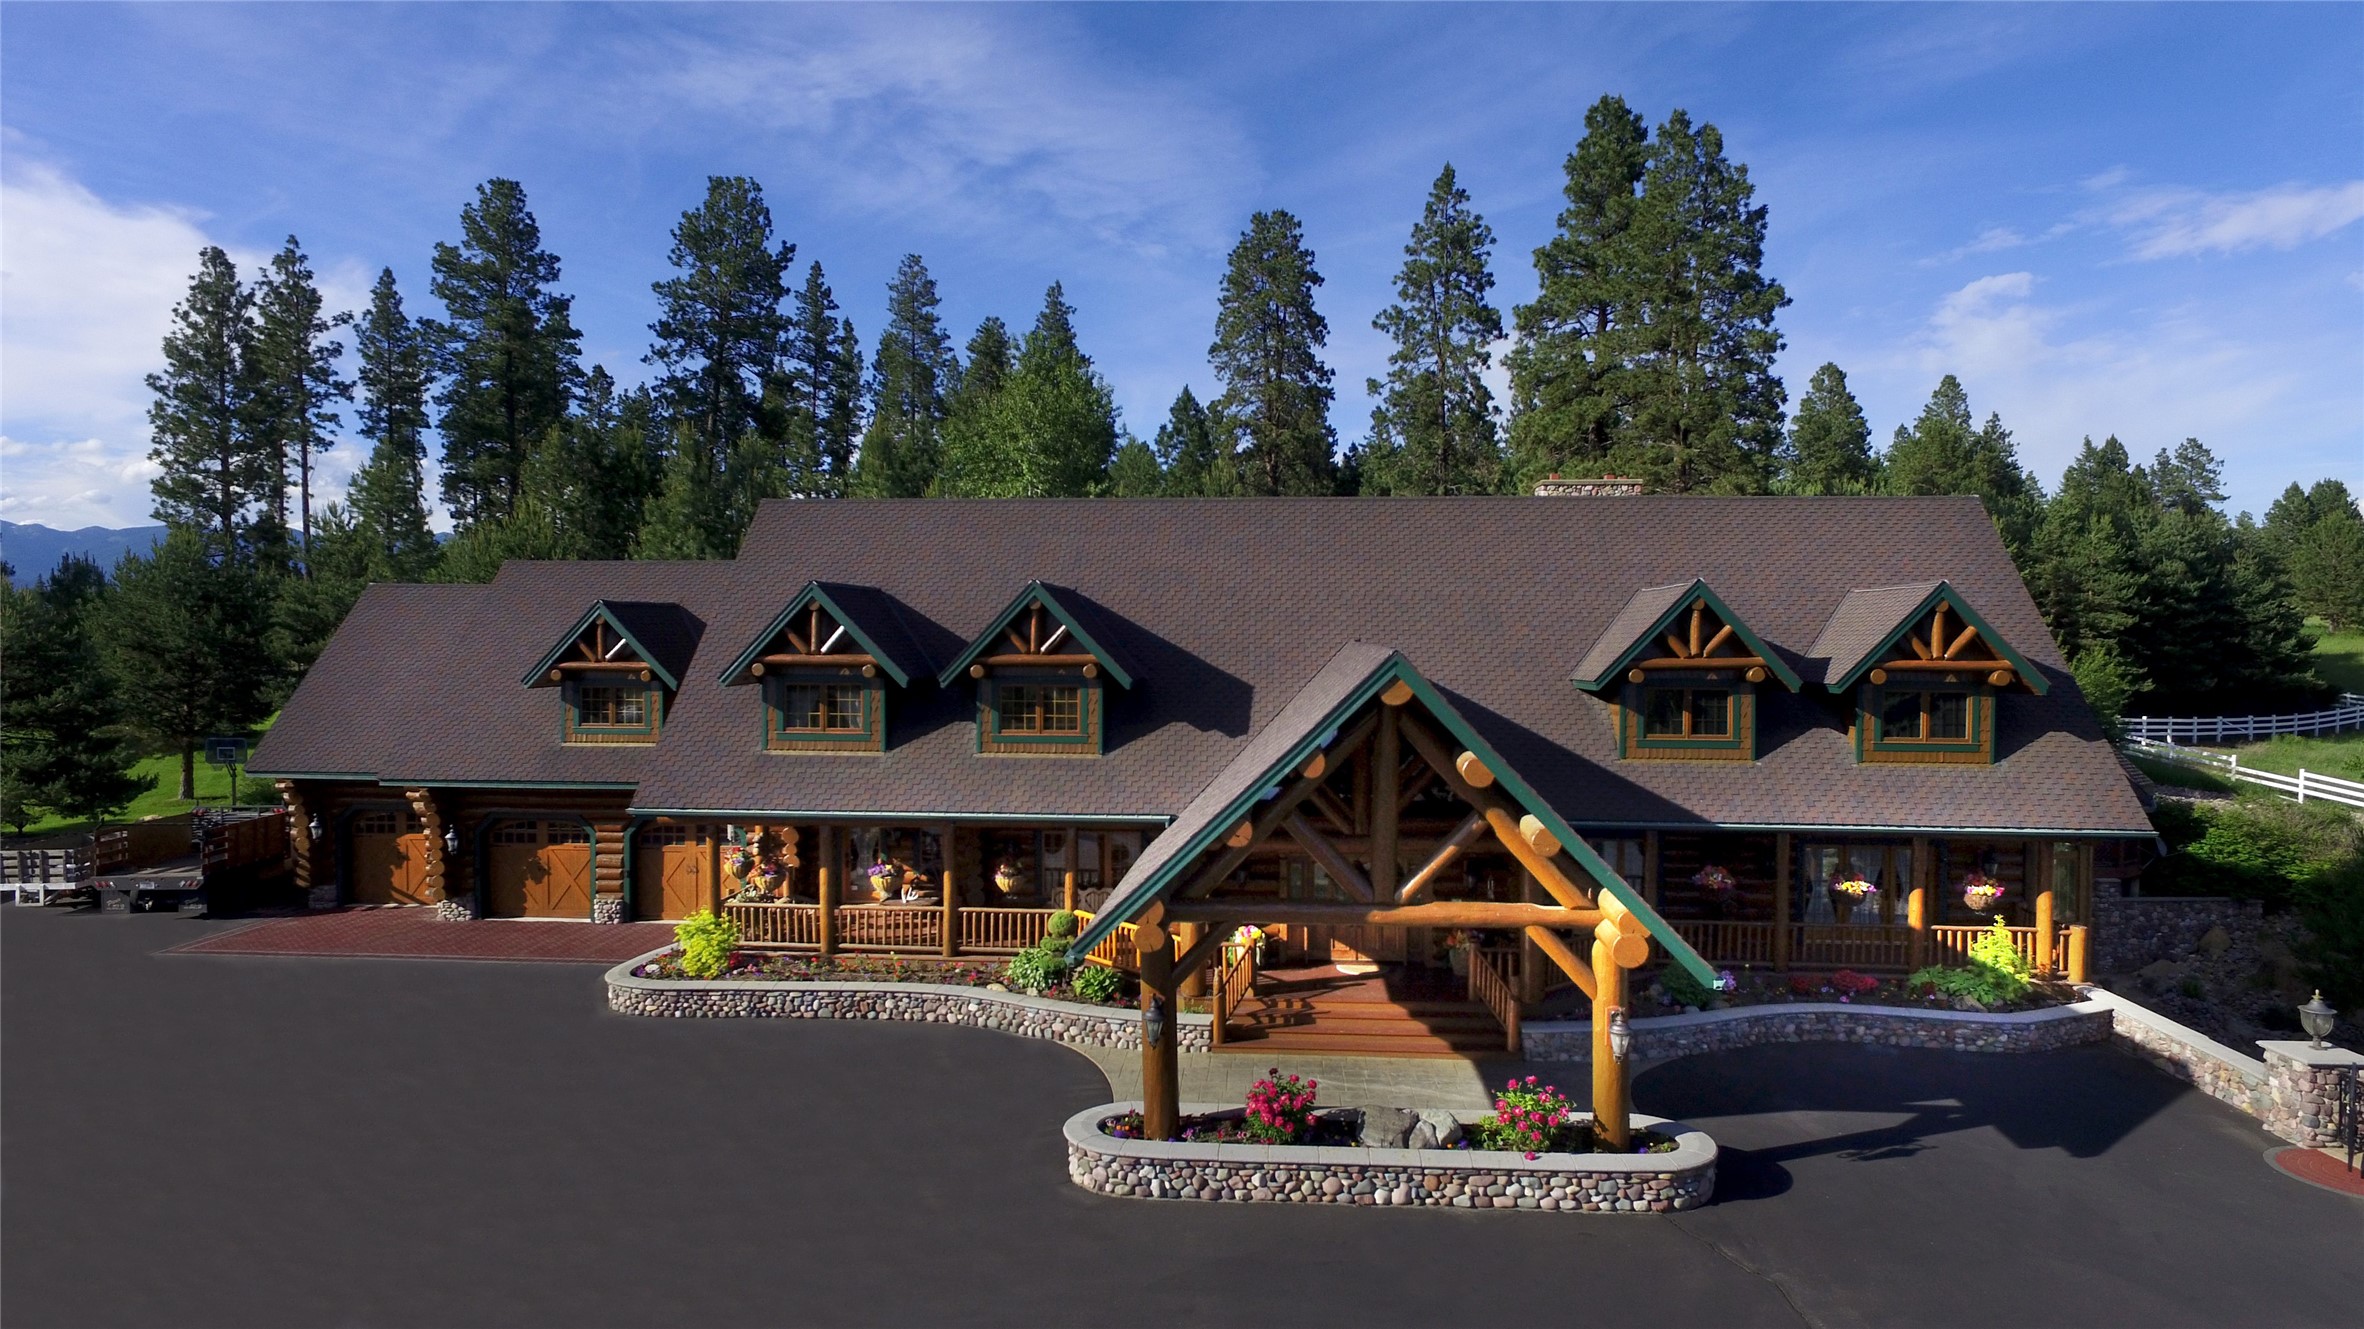 This  Montana log home sets in the north end of the Flathead Valley and between the ski town of Whitefish and the gateway to Glacier National Park.  
This private 40-acre property is only minutes to Whitefish, Glacier National Park and Glacier International Airport.  This 9100 sf main home, as well as the 1688 sq ft guest house, showcase the Montana-style living at its best.  The owner spared no expense in the creation of a 12,000 sf event center with an Old Western facade interior and a real old west saloon.  All original horse facilities are still intact for a turnkey experience for an equestrian minded buyer or it can be easily transformed to accommodate a large car collection!  There is an amazing orchard which also provides an abundant amount of apples, pears, cherries, and more!
 All  information included herein has been obtained from third party sources and is deemed to be reliable, however, agents and buyers are advised to research all information to their own satisfaction. No lockbox!  Owner requests that the listing agent be present when property is shown.  Please allow extra time for your buyer to physically inspect the entire property.  There is so much to see!  Many aspects of the property cannot be adequately addressed because of the confinement of this listing format !